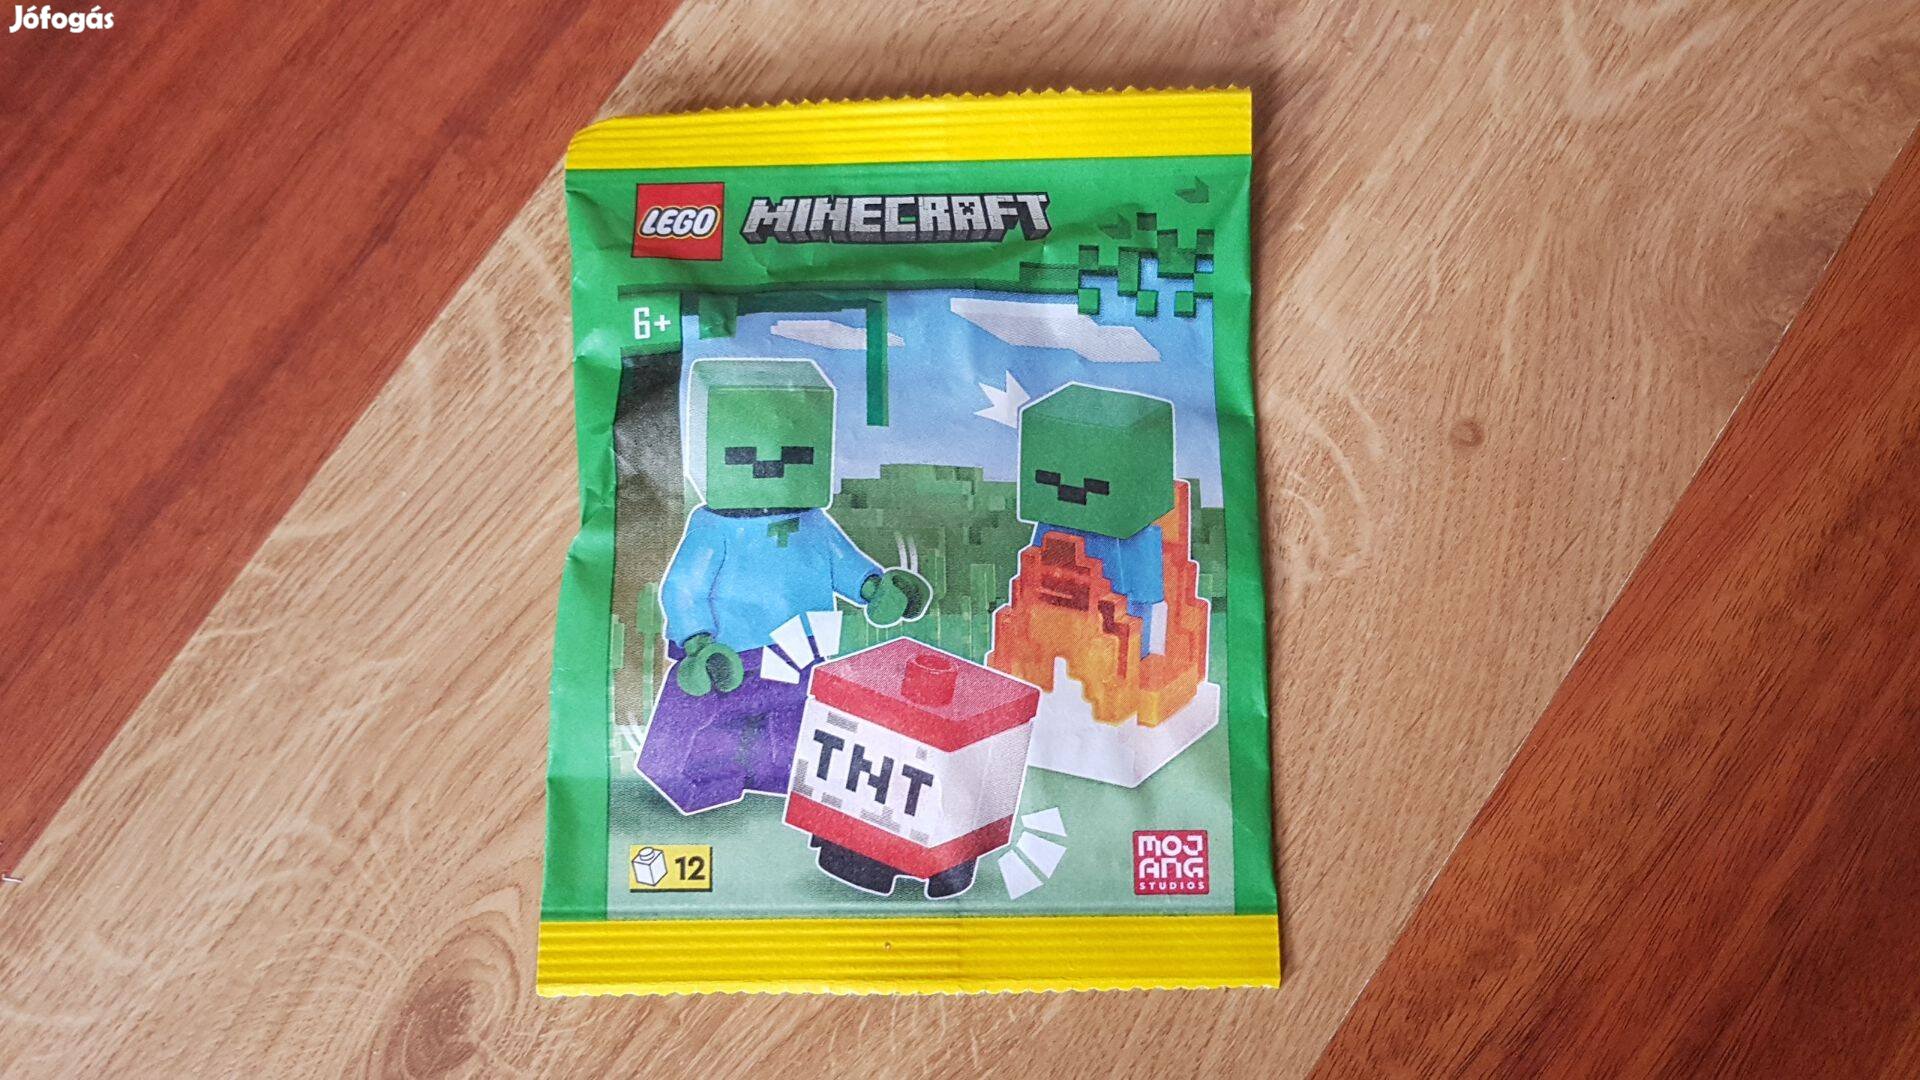 Lego Minec662403 Zombie with Burning Baby Zombie and TNT